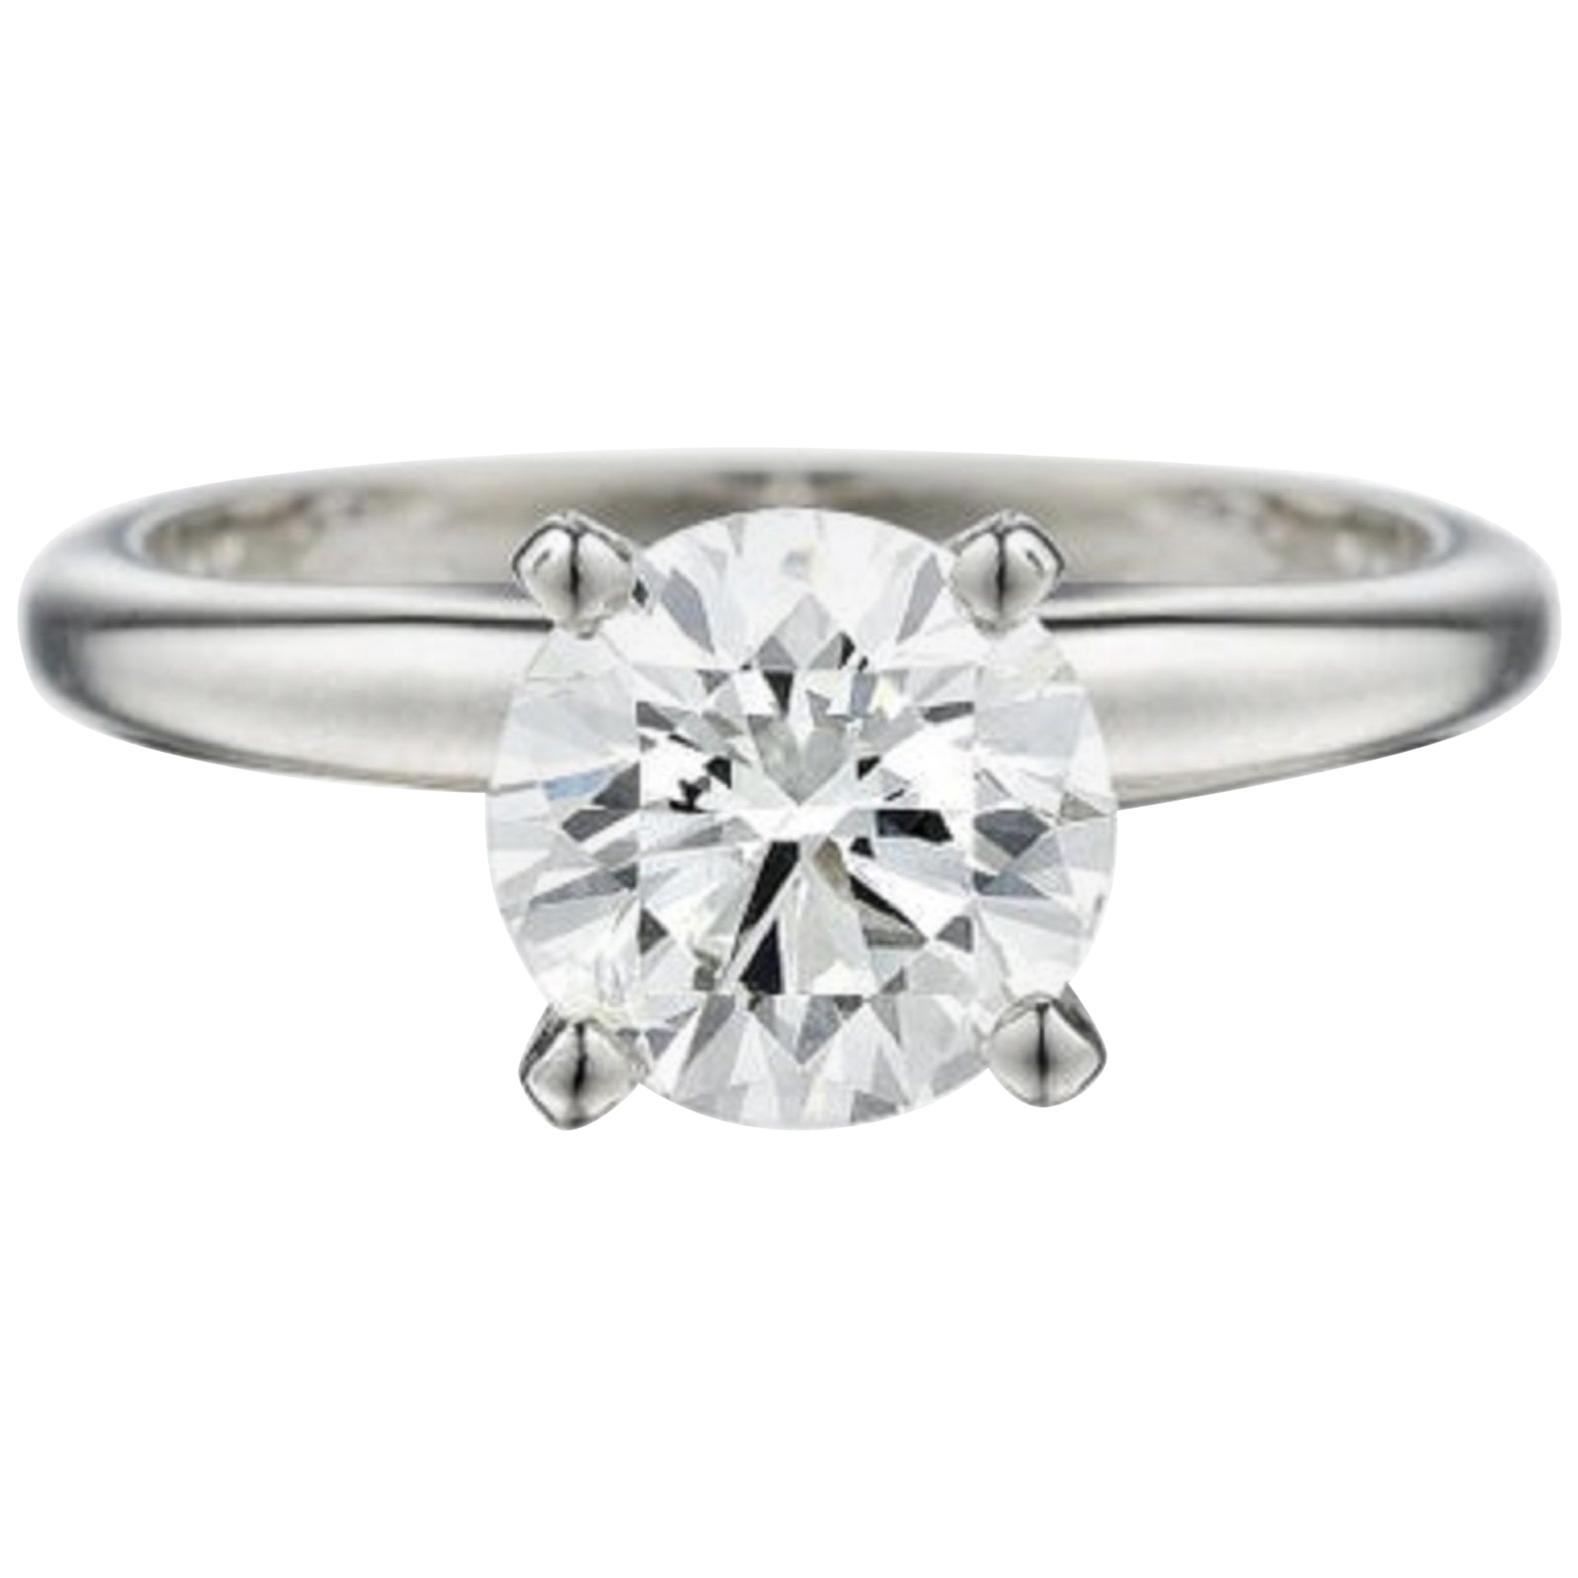 GIA Certified 2 Carat Round Cut Diamond Platinum Ring Flawless D Color